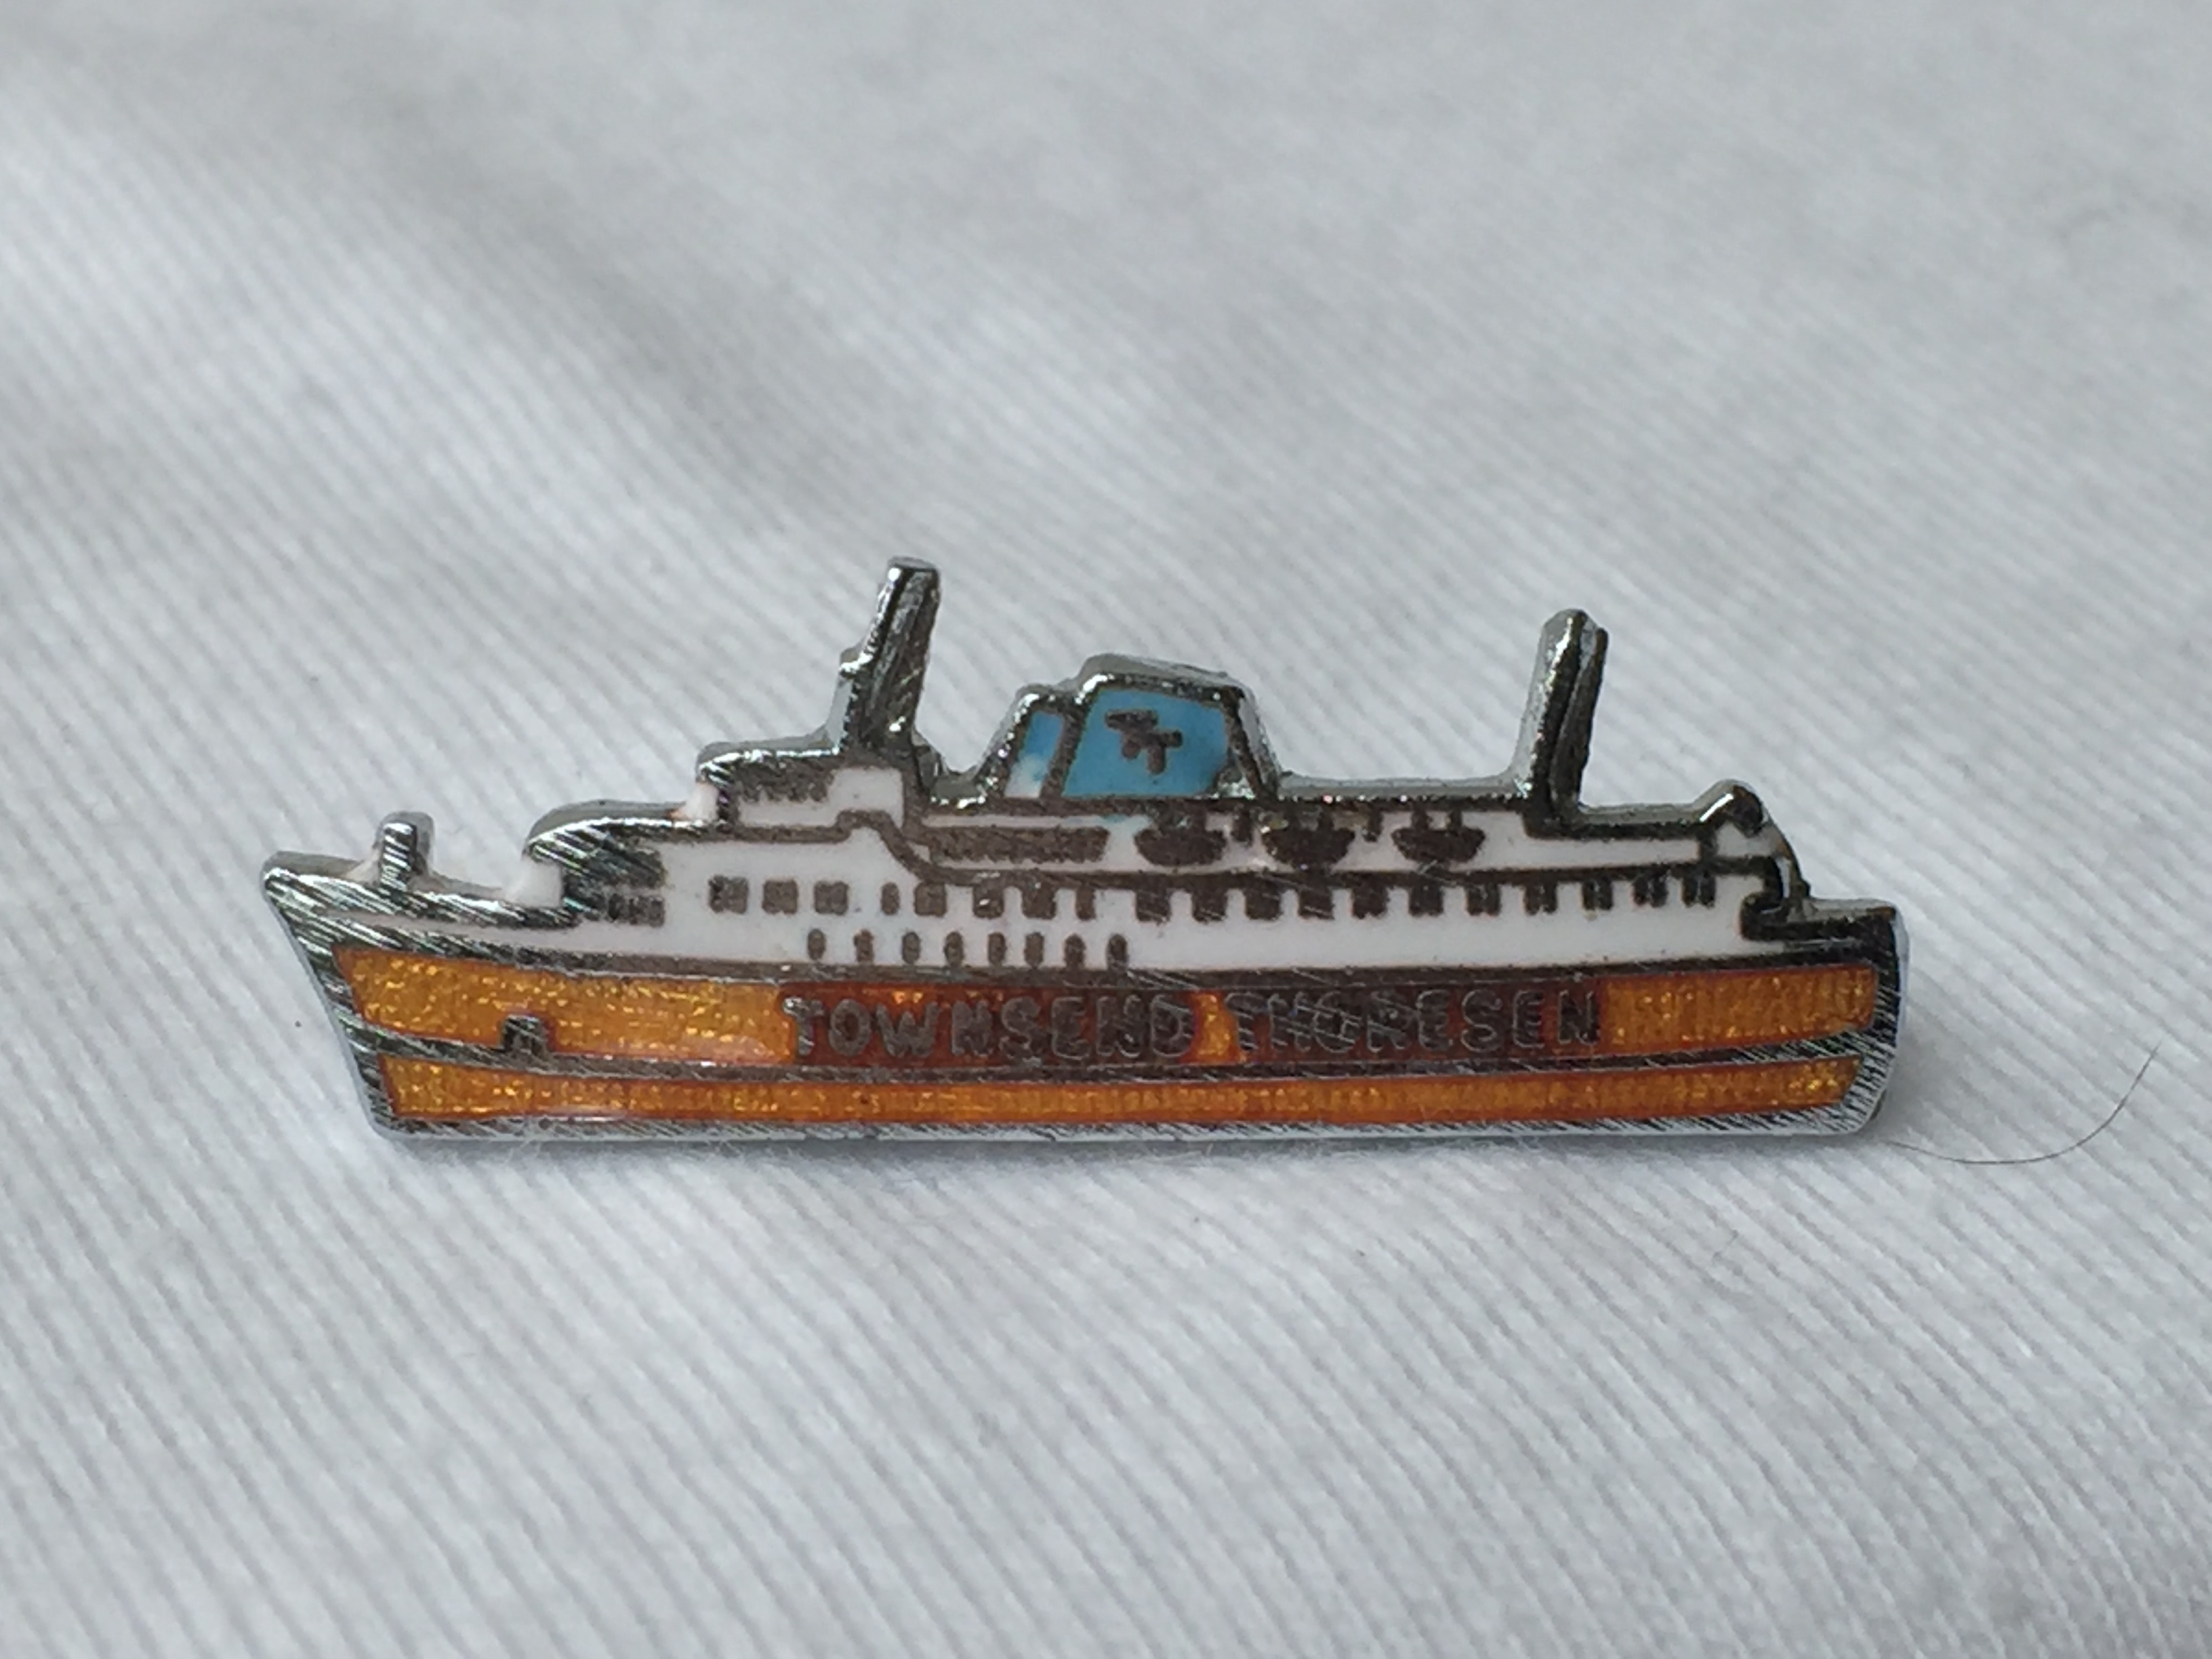 SHIP SHAPE LAPEL PIN FROM THE FERRY CROSSING SERVICE COMPANY TOWNSEND THORESEN 